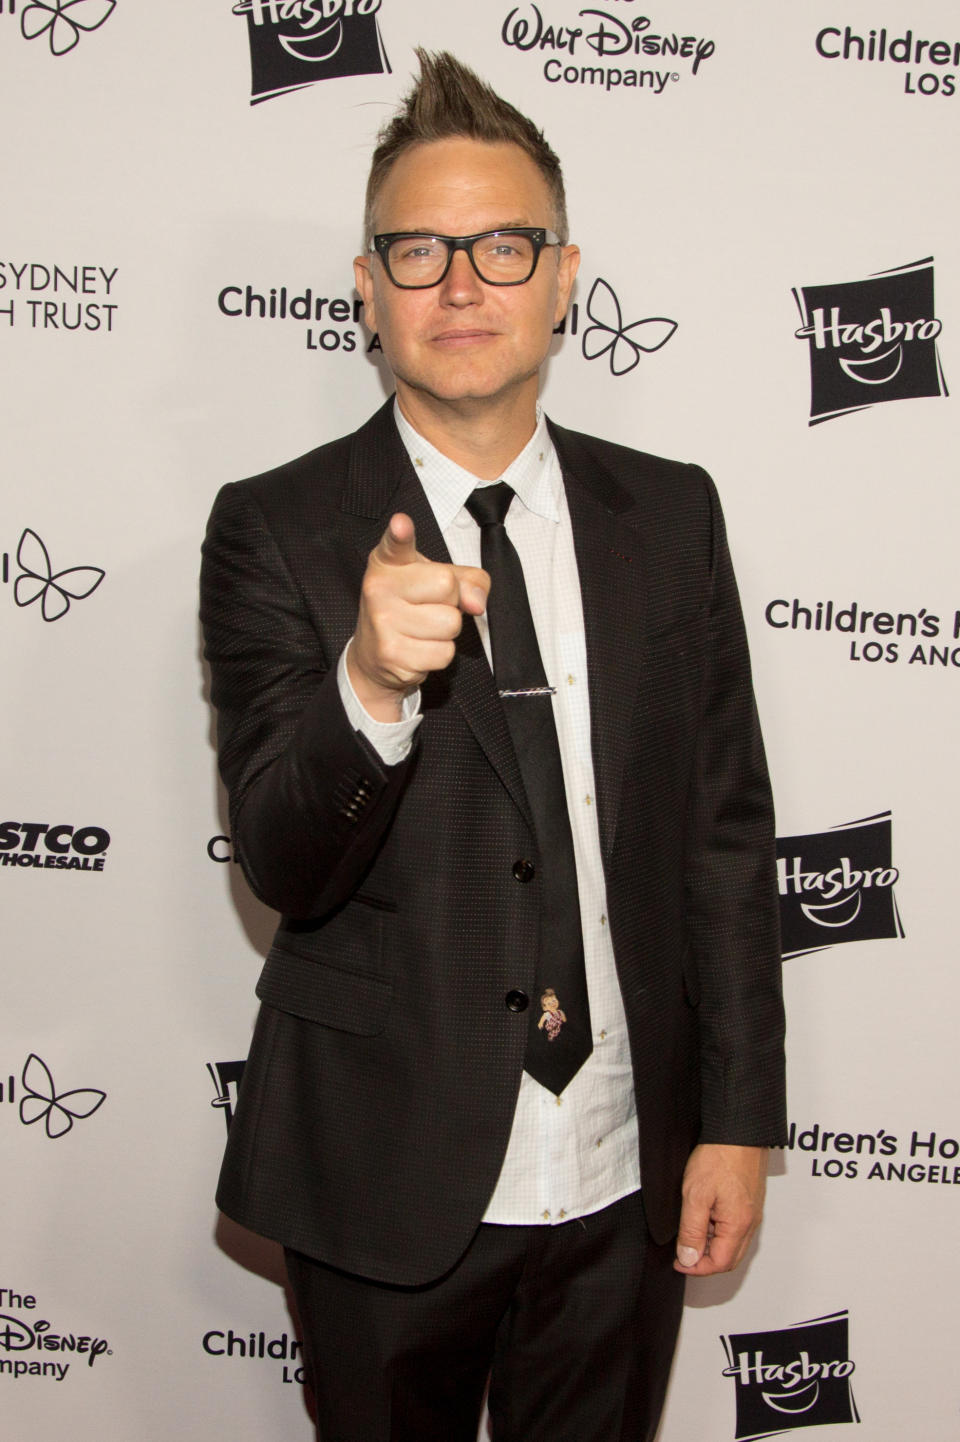 Man in a black suit with a patterned tie giving a thumbs-up at a charity event